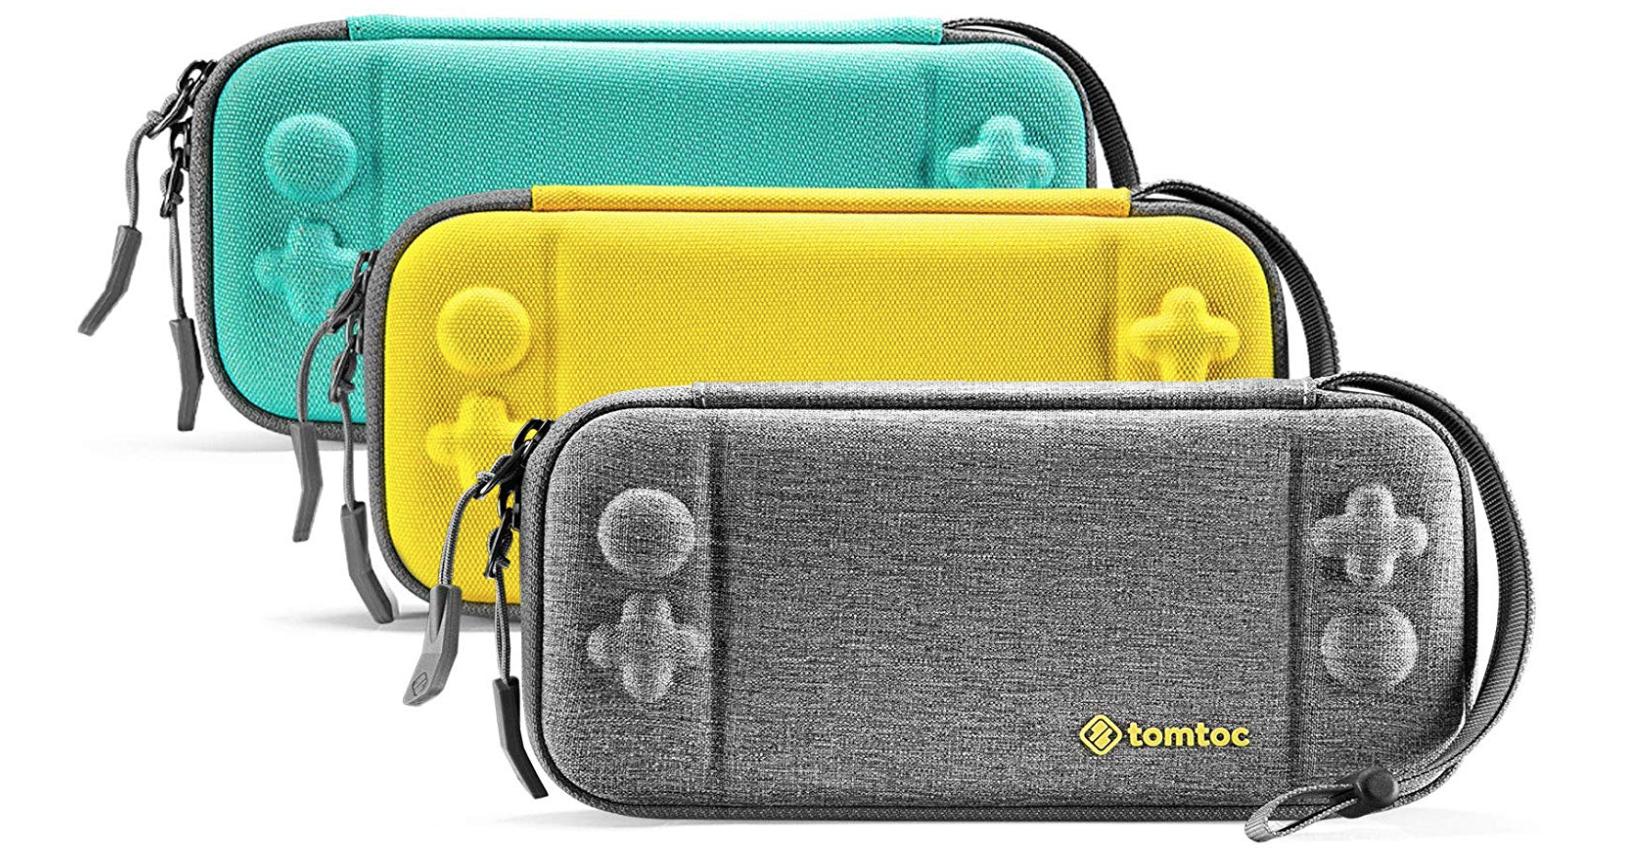 tomtoc Switch cases